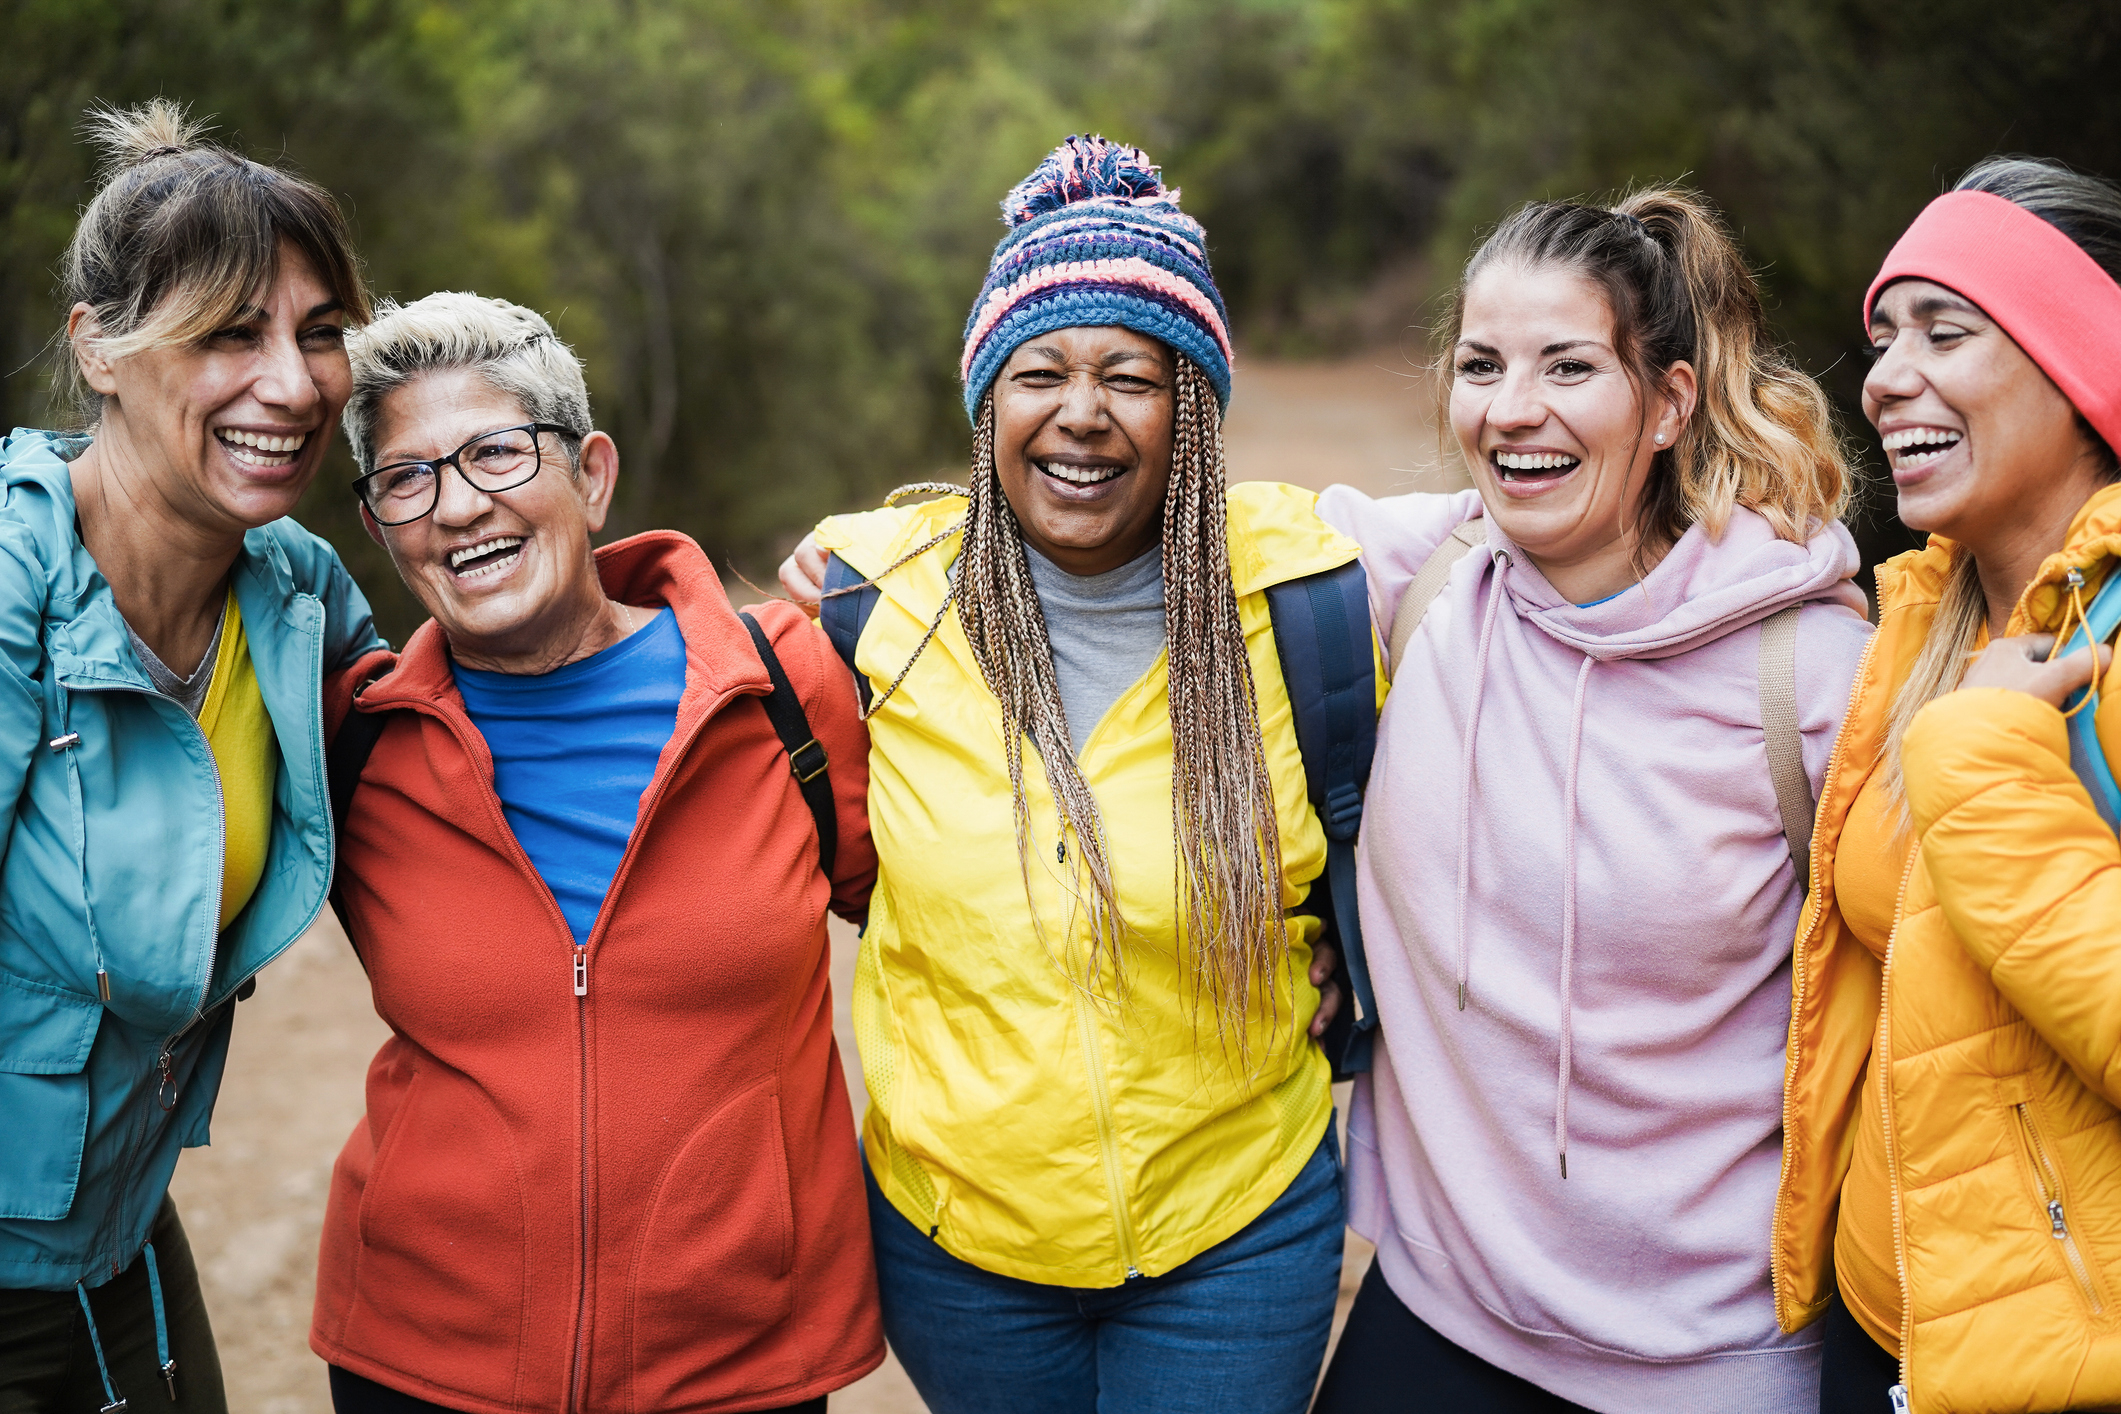 A group of women smiling and laughing on a hike